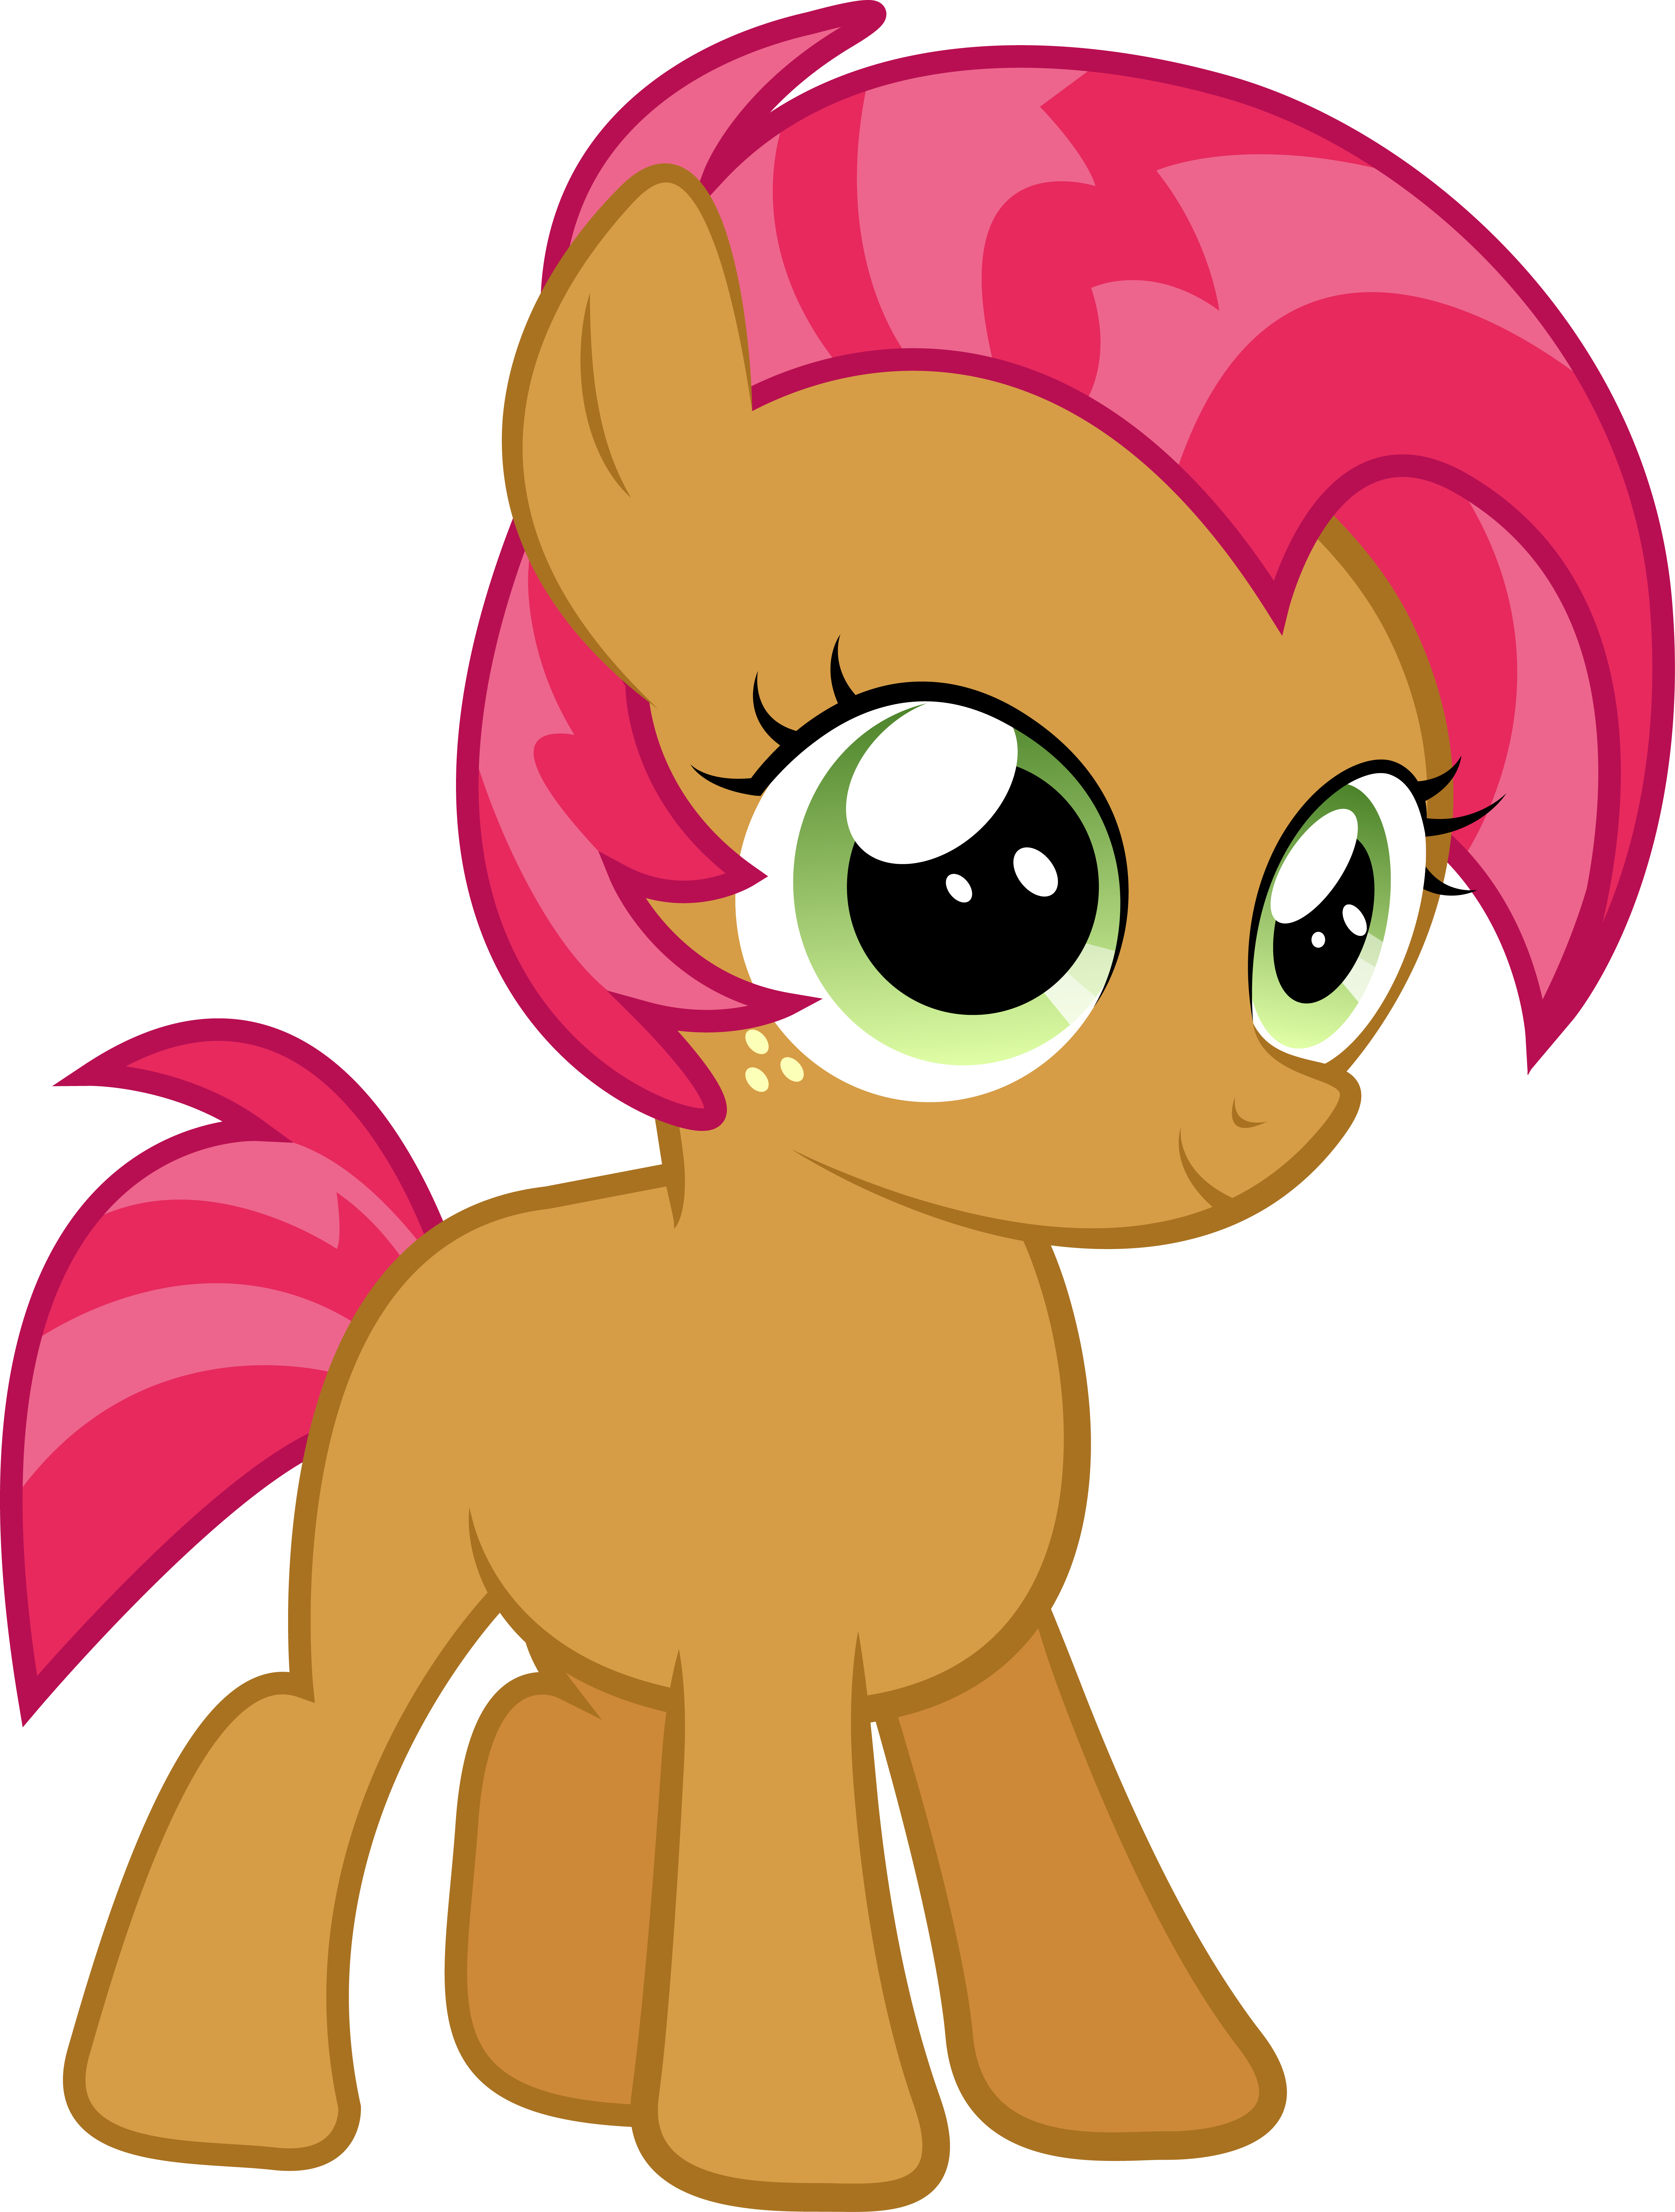 My Little Pony Friendship Is Magic Babs Seed - My Little Pony Apple Bloom's Cousin (5157x6809)